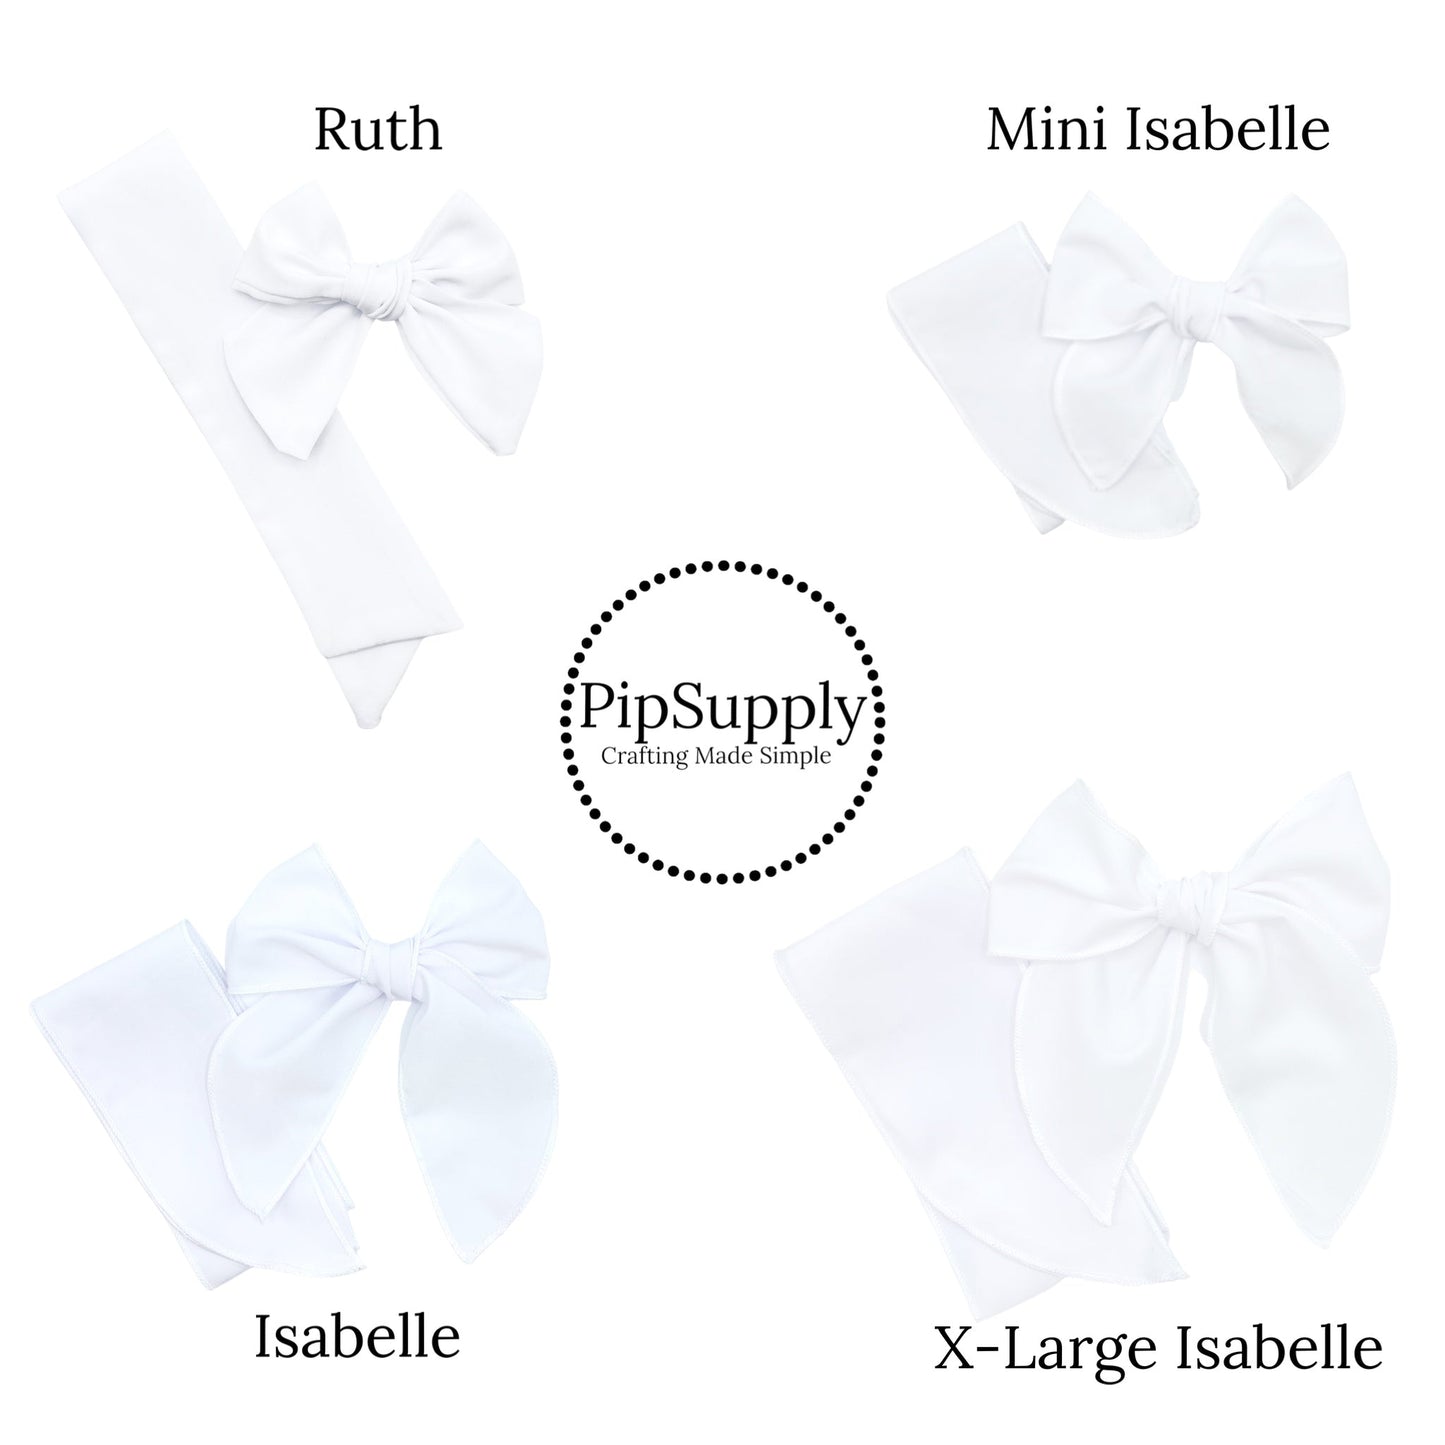 Delicate Butterflies Baby Blue Hair Bow Strips